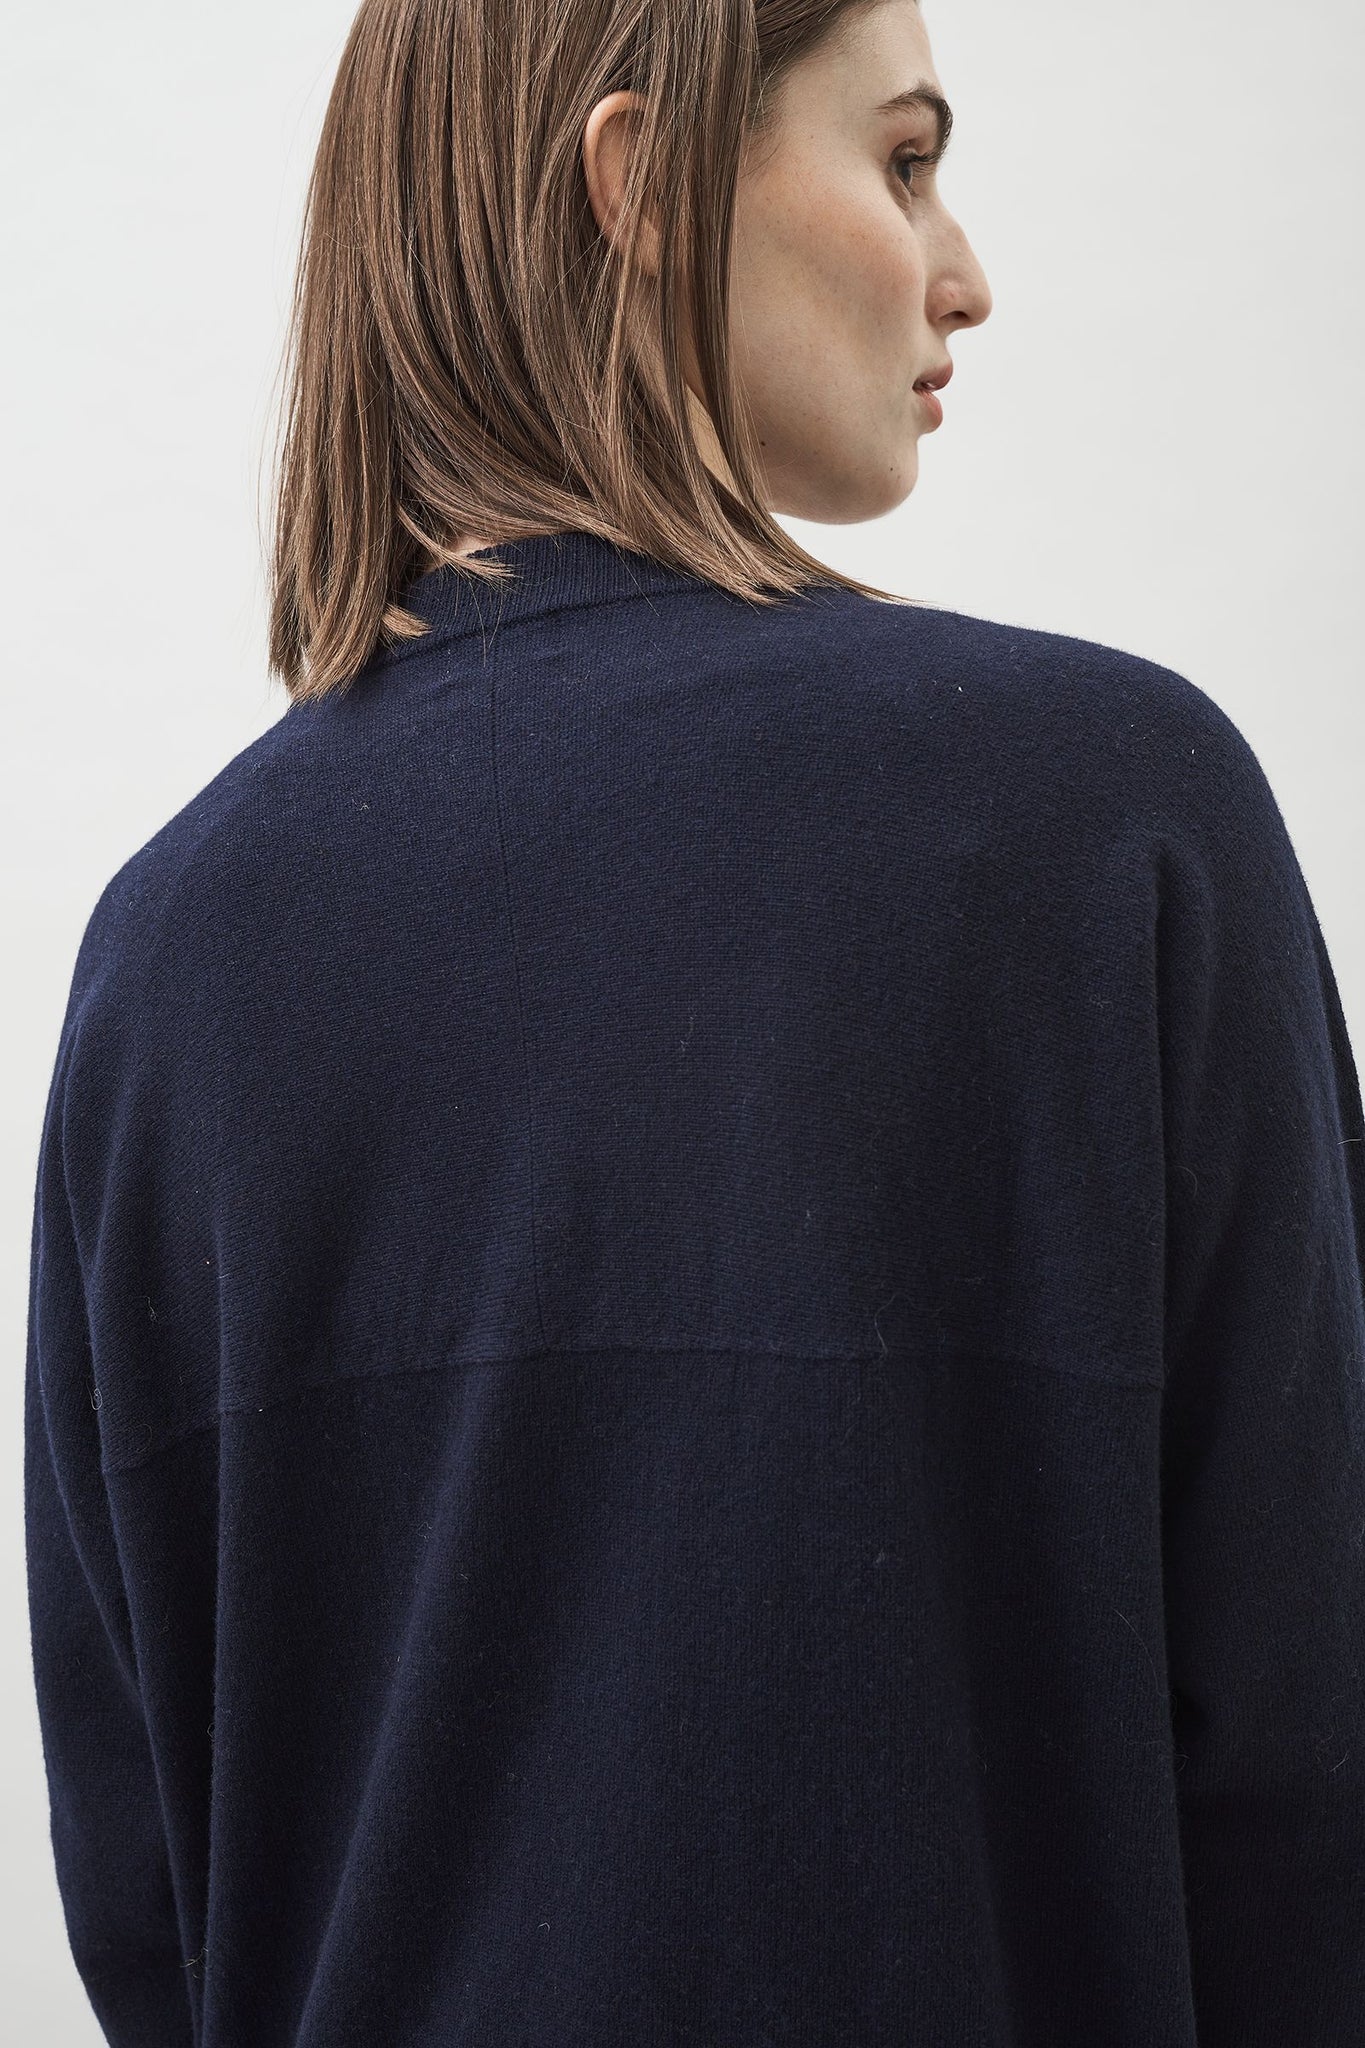 KNITTED SWEATER BY MASKA IN NIGHT BLUE